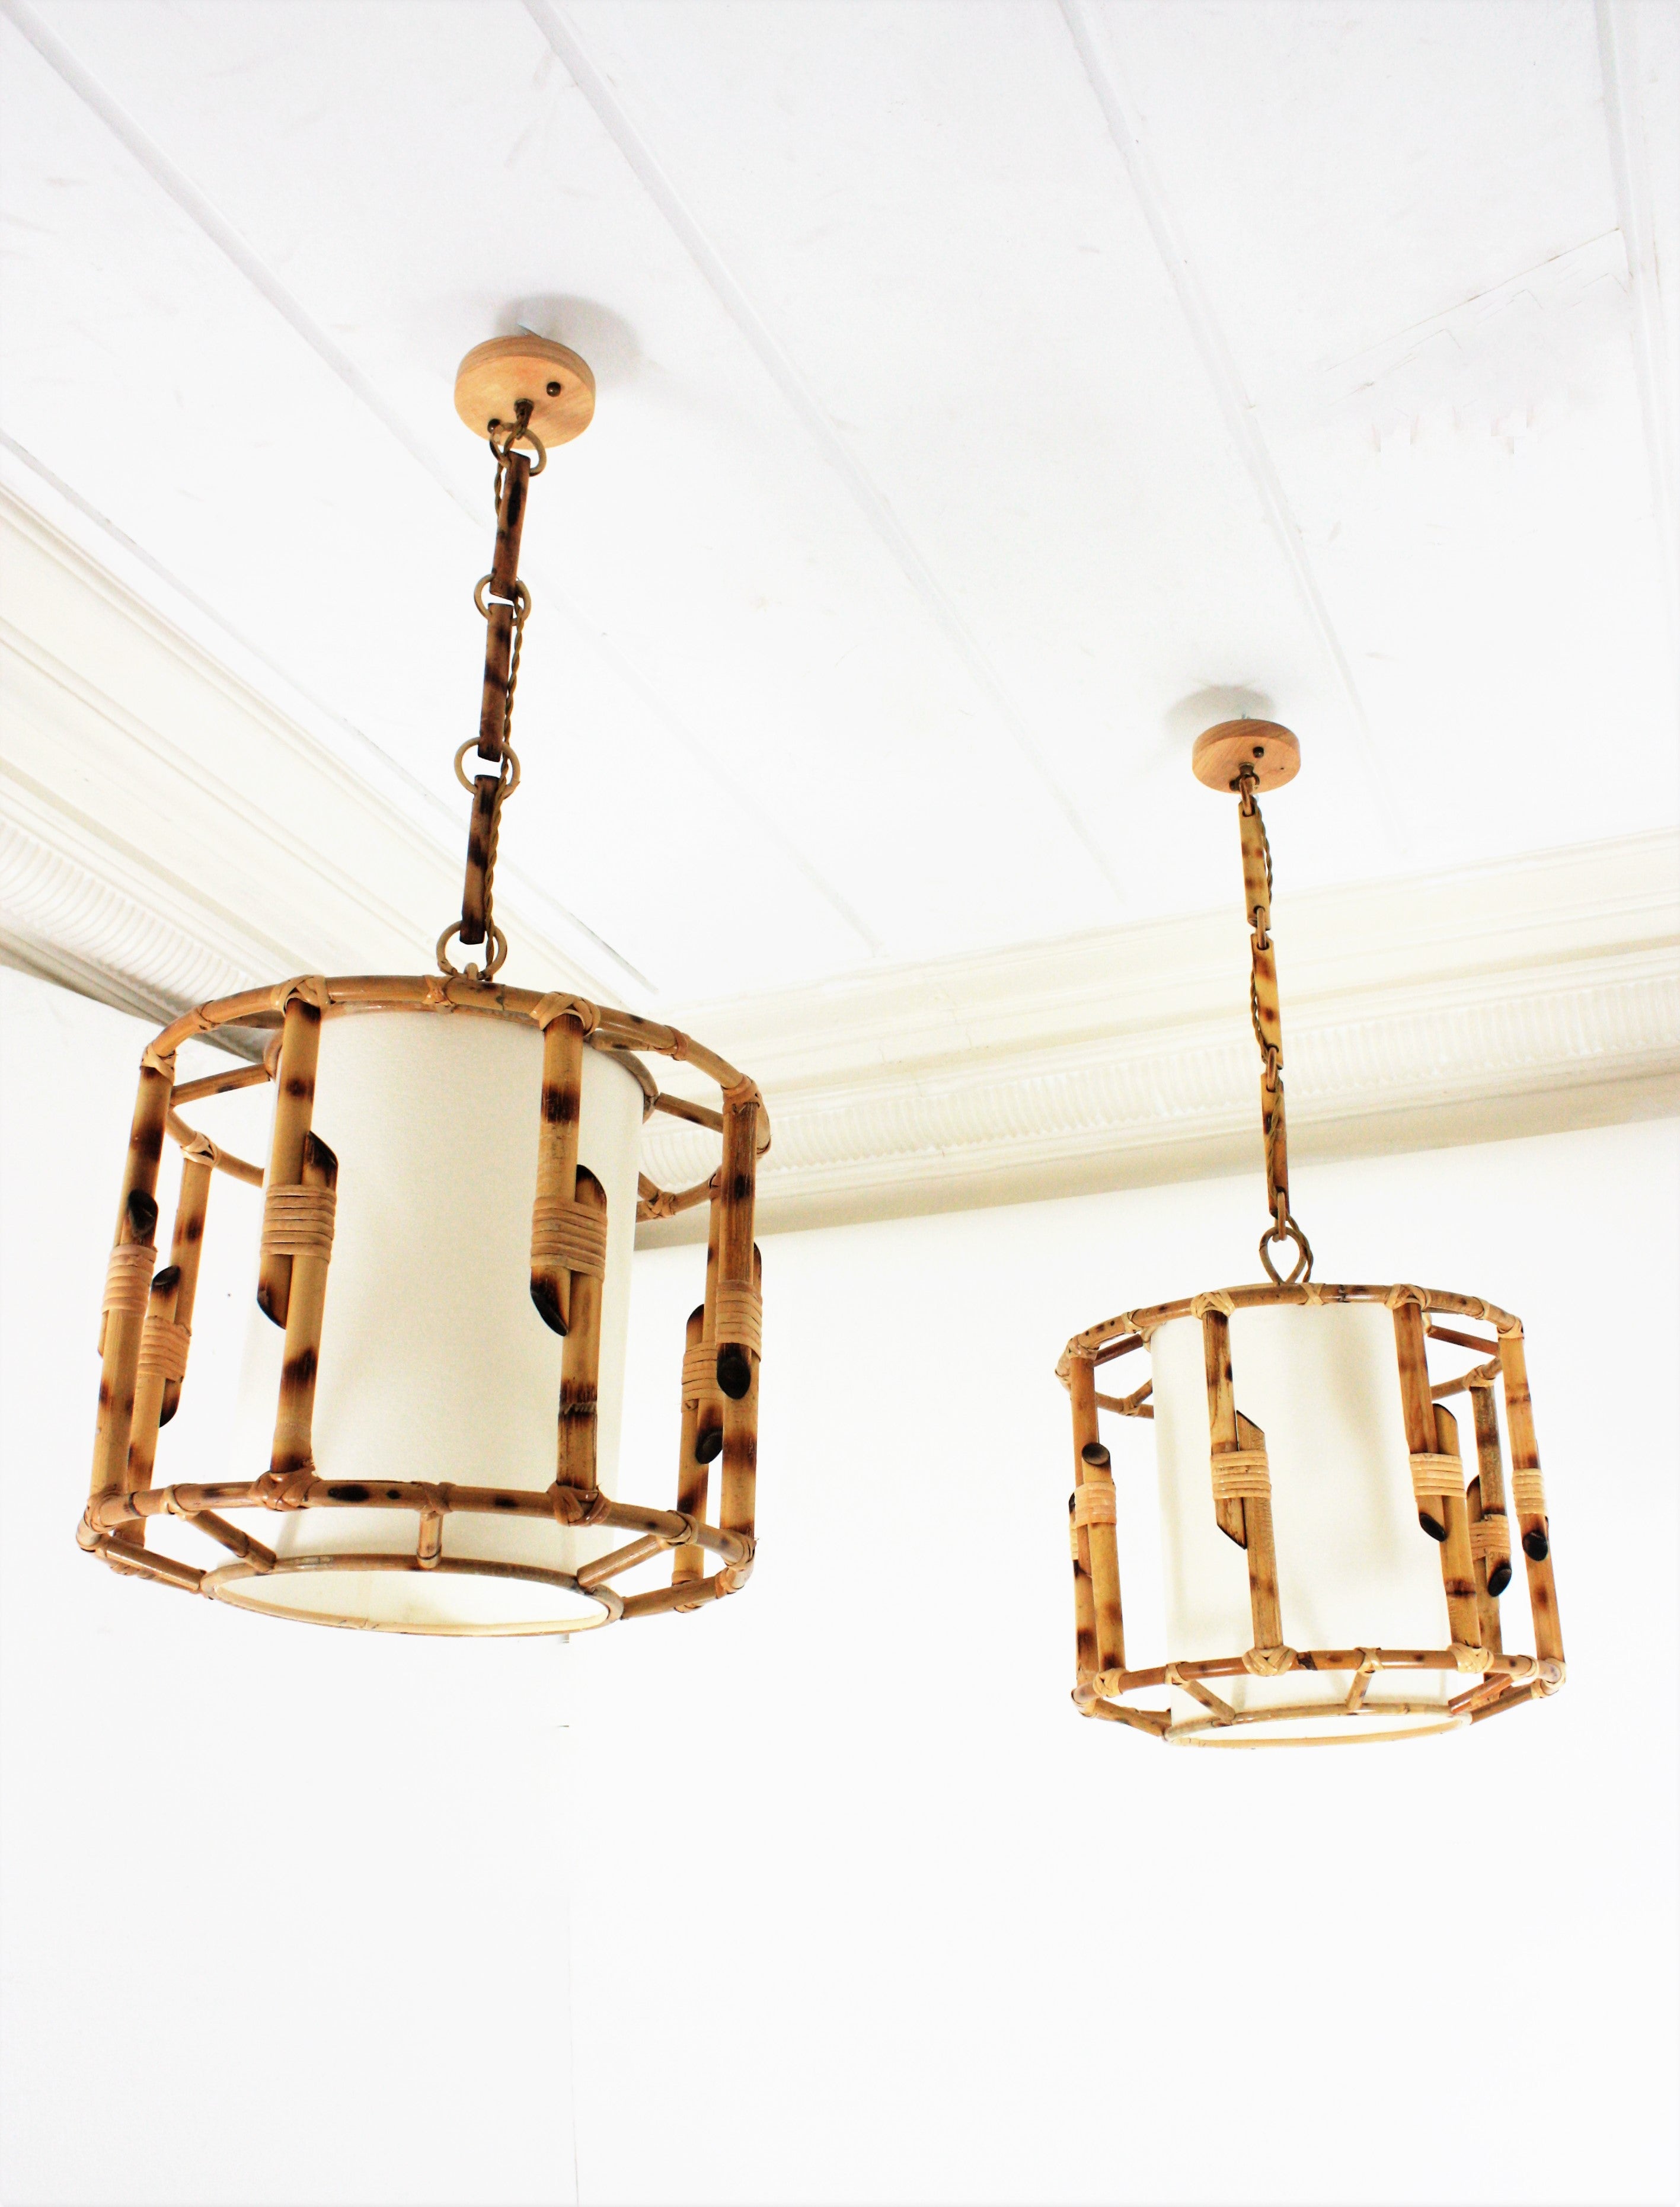 A cool pair of handcrafted rattan drum shaped ceiling suspension lamps with inner paper lampshades. France, 1960s
These large lanterns have an eye-catching design featuring a cylindrical bamboo structure with a paper lampshade to diffuse the